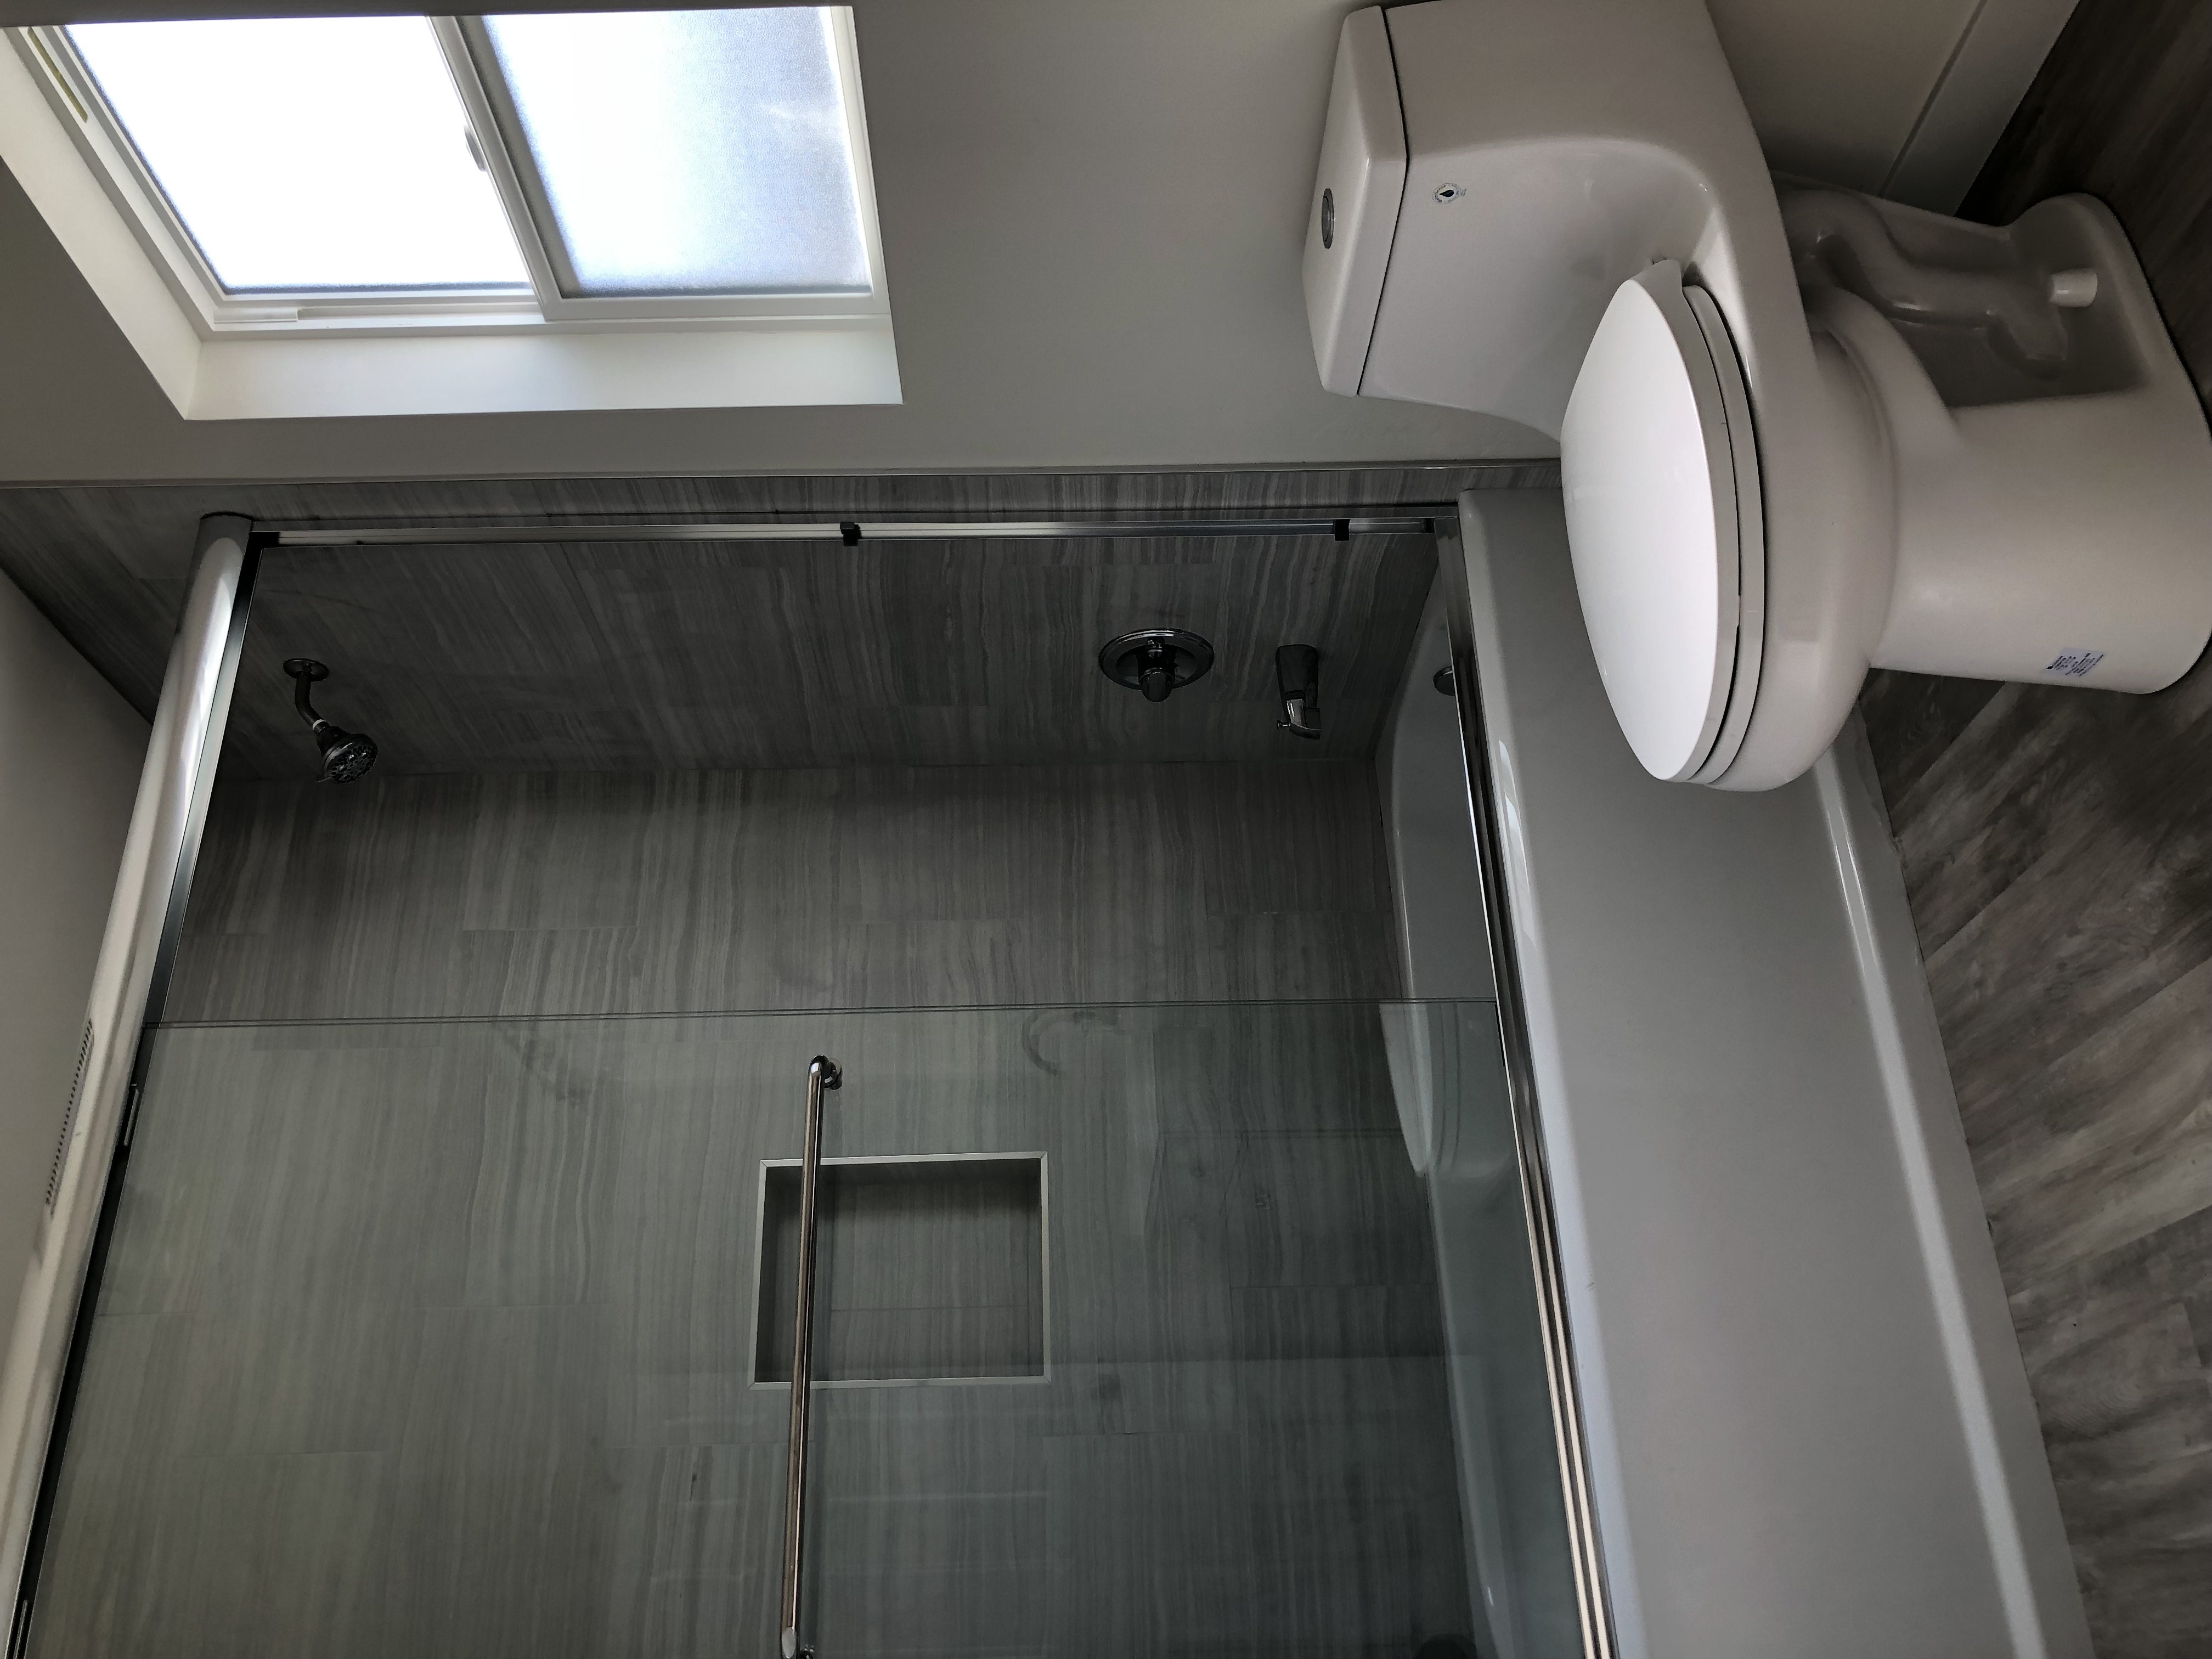 newly-built-ADU-showing-custom-cabinet-and-beautiful-light-fixture-in-the-bathroom